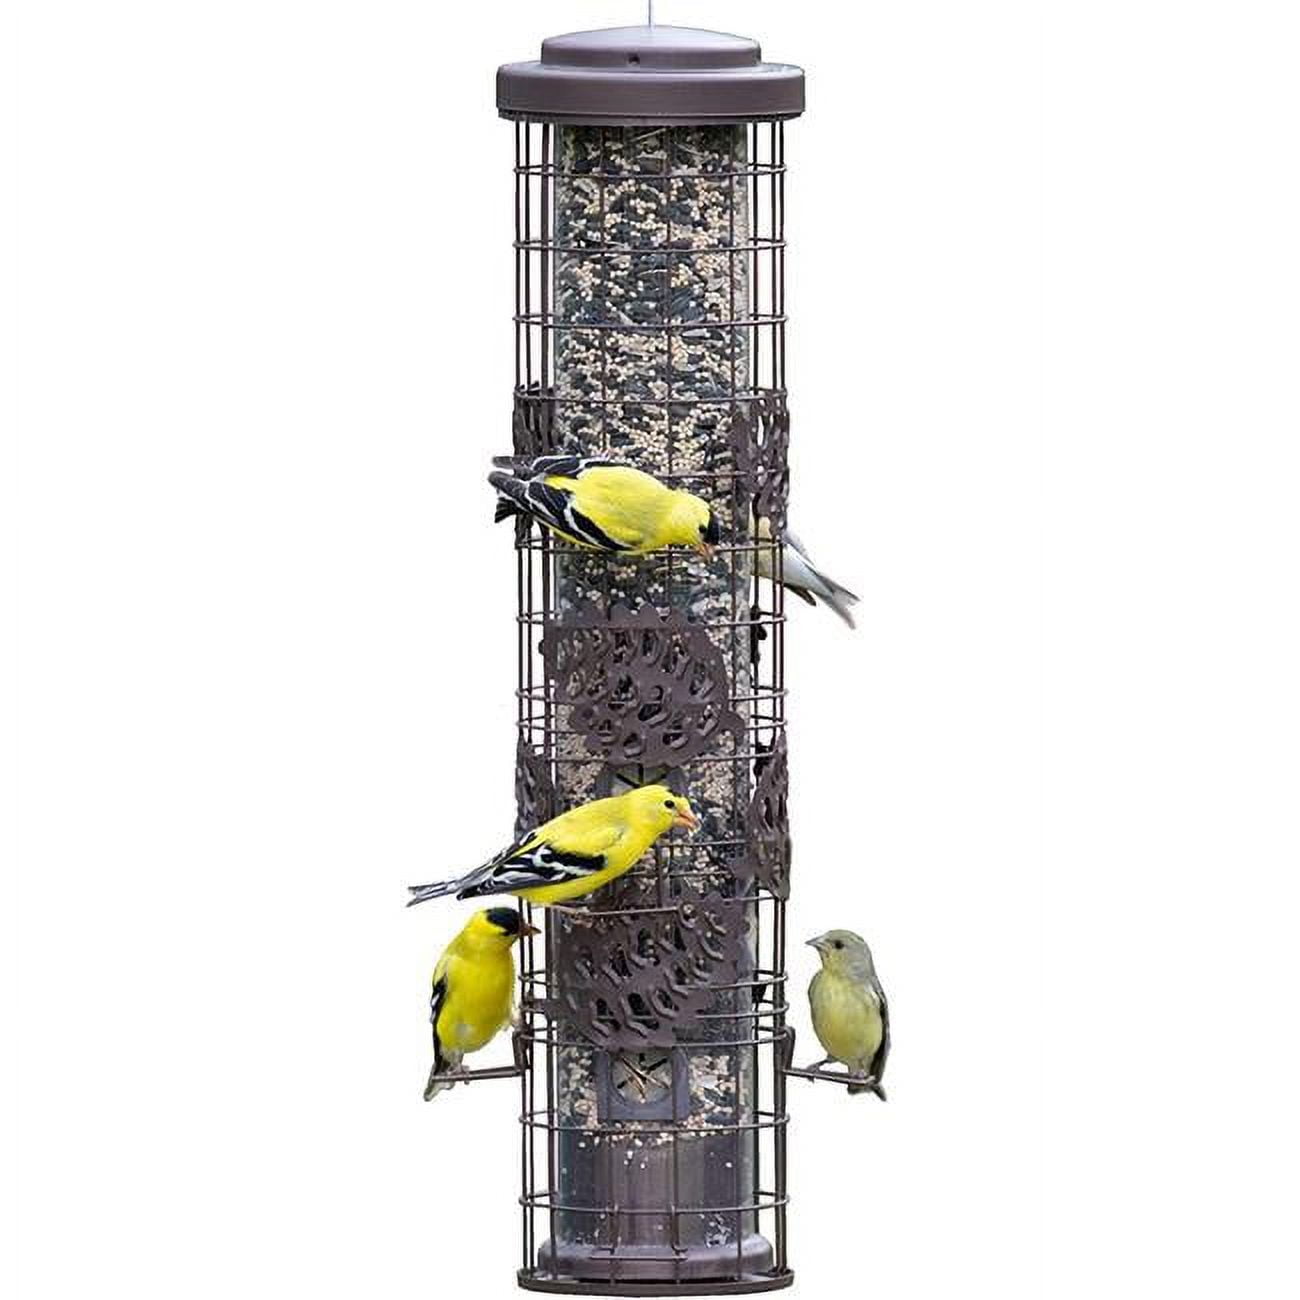 Picture of Woodstream SBG101 1.75 lbs Squirrel-Be-Gone Max Pinecone Bird Feeder with Flexport